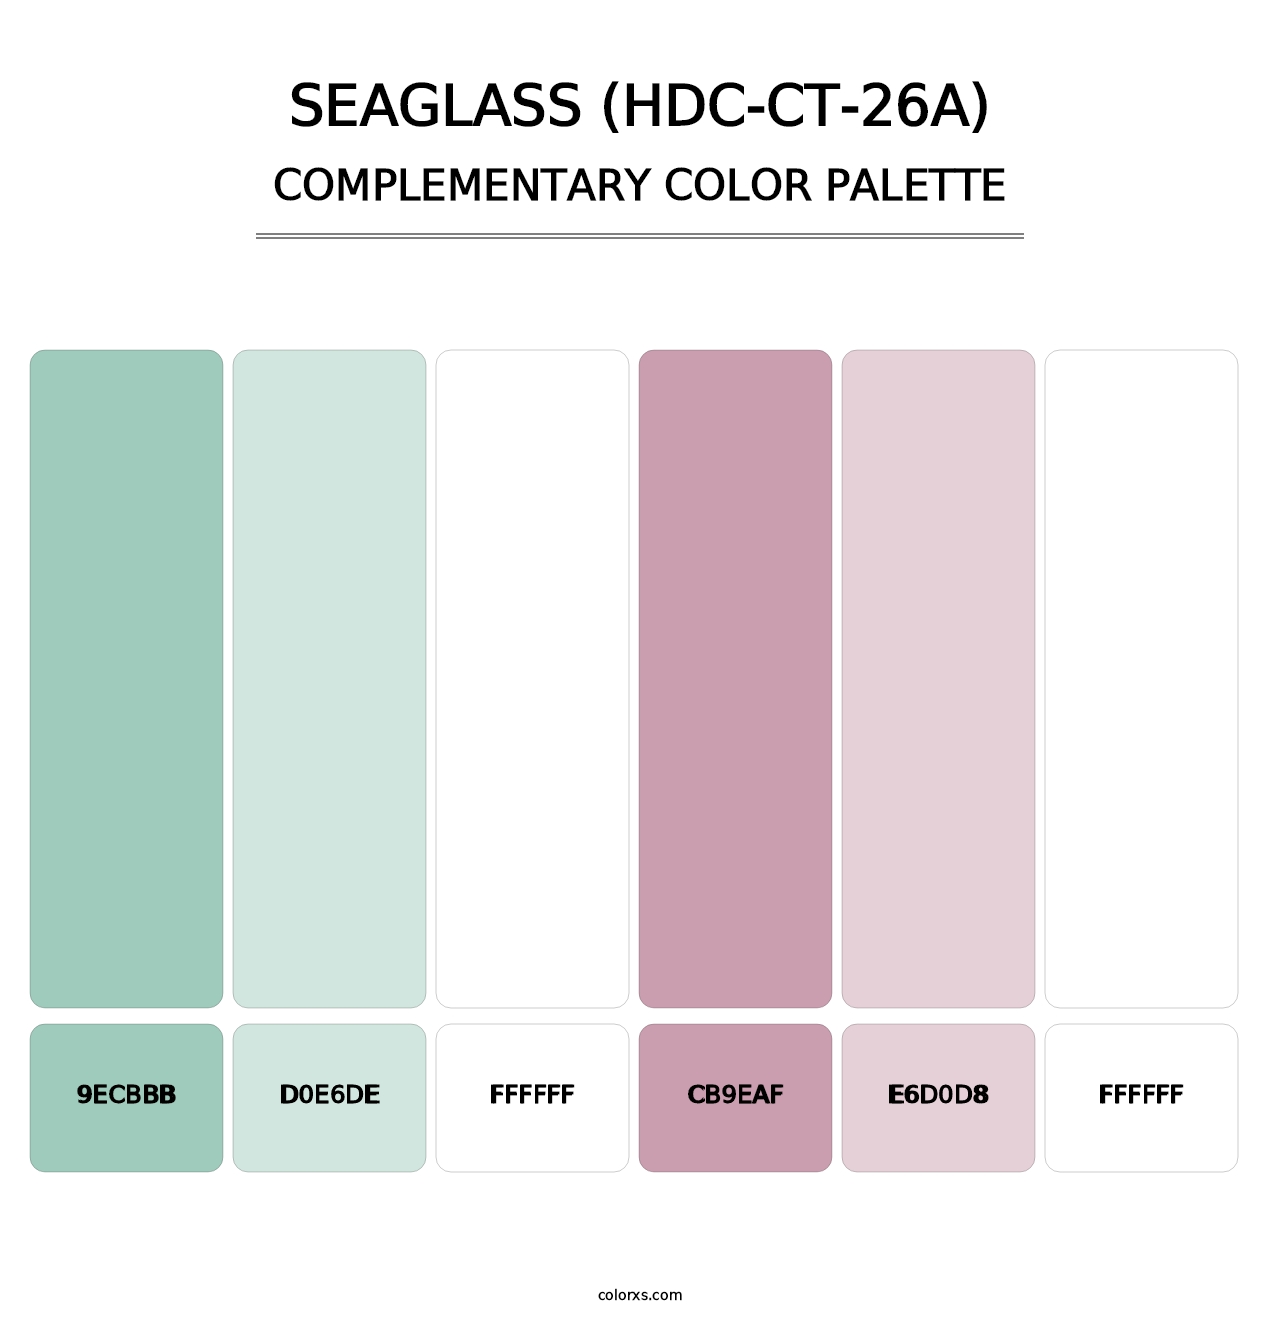 Seaglass (HDC-CT-26A) - Complementary Color Palette